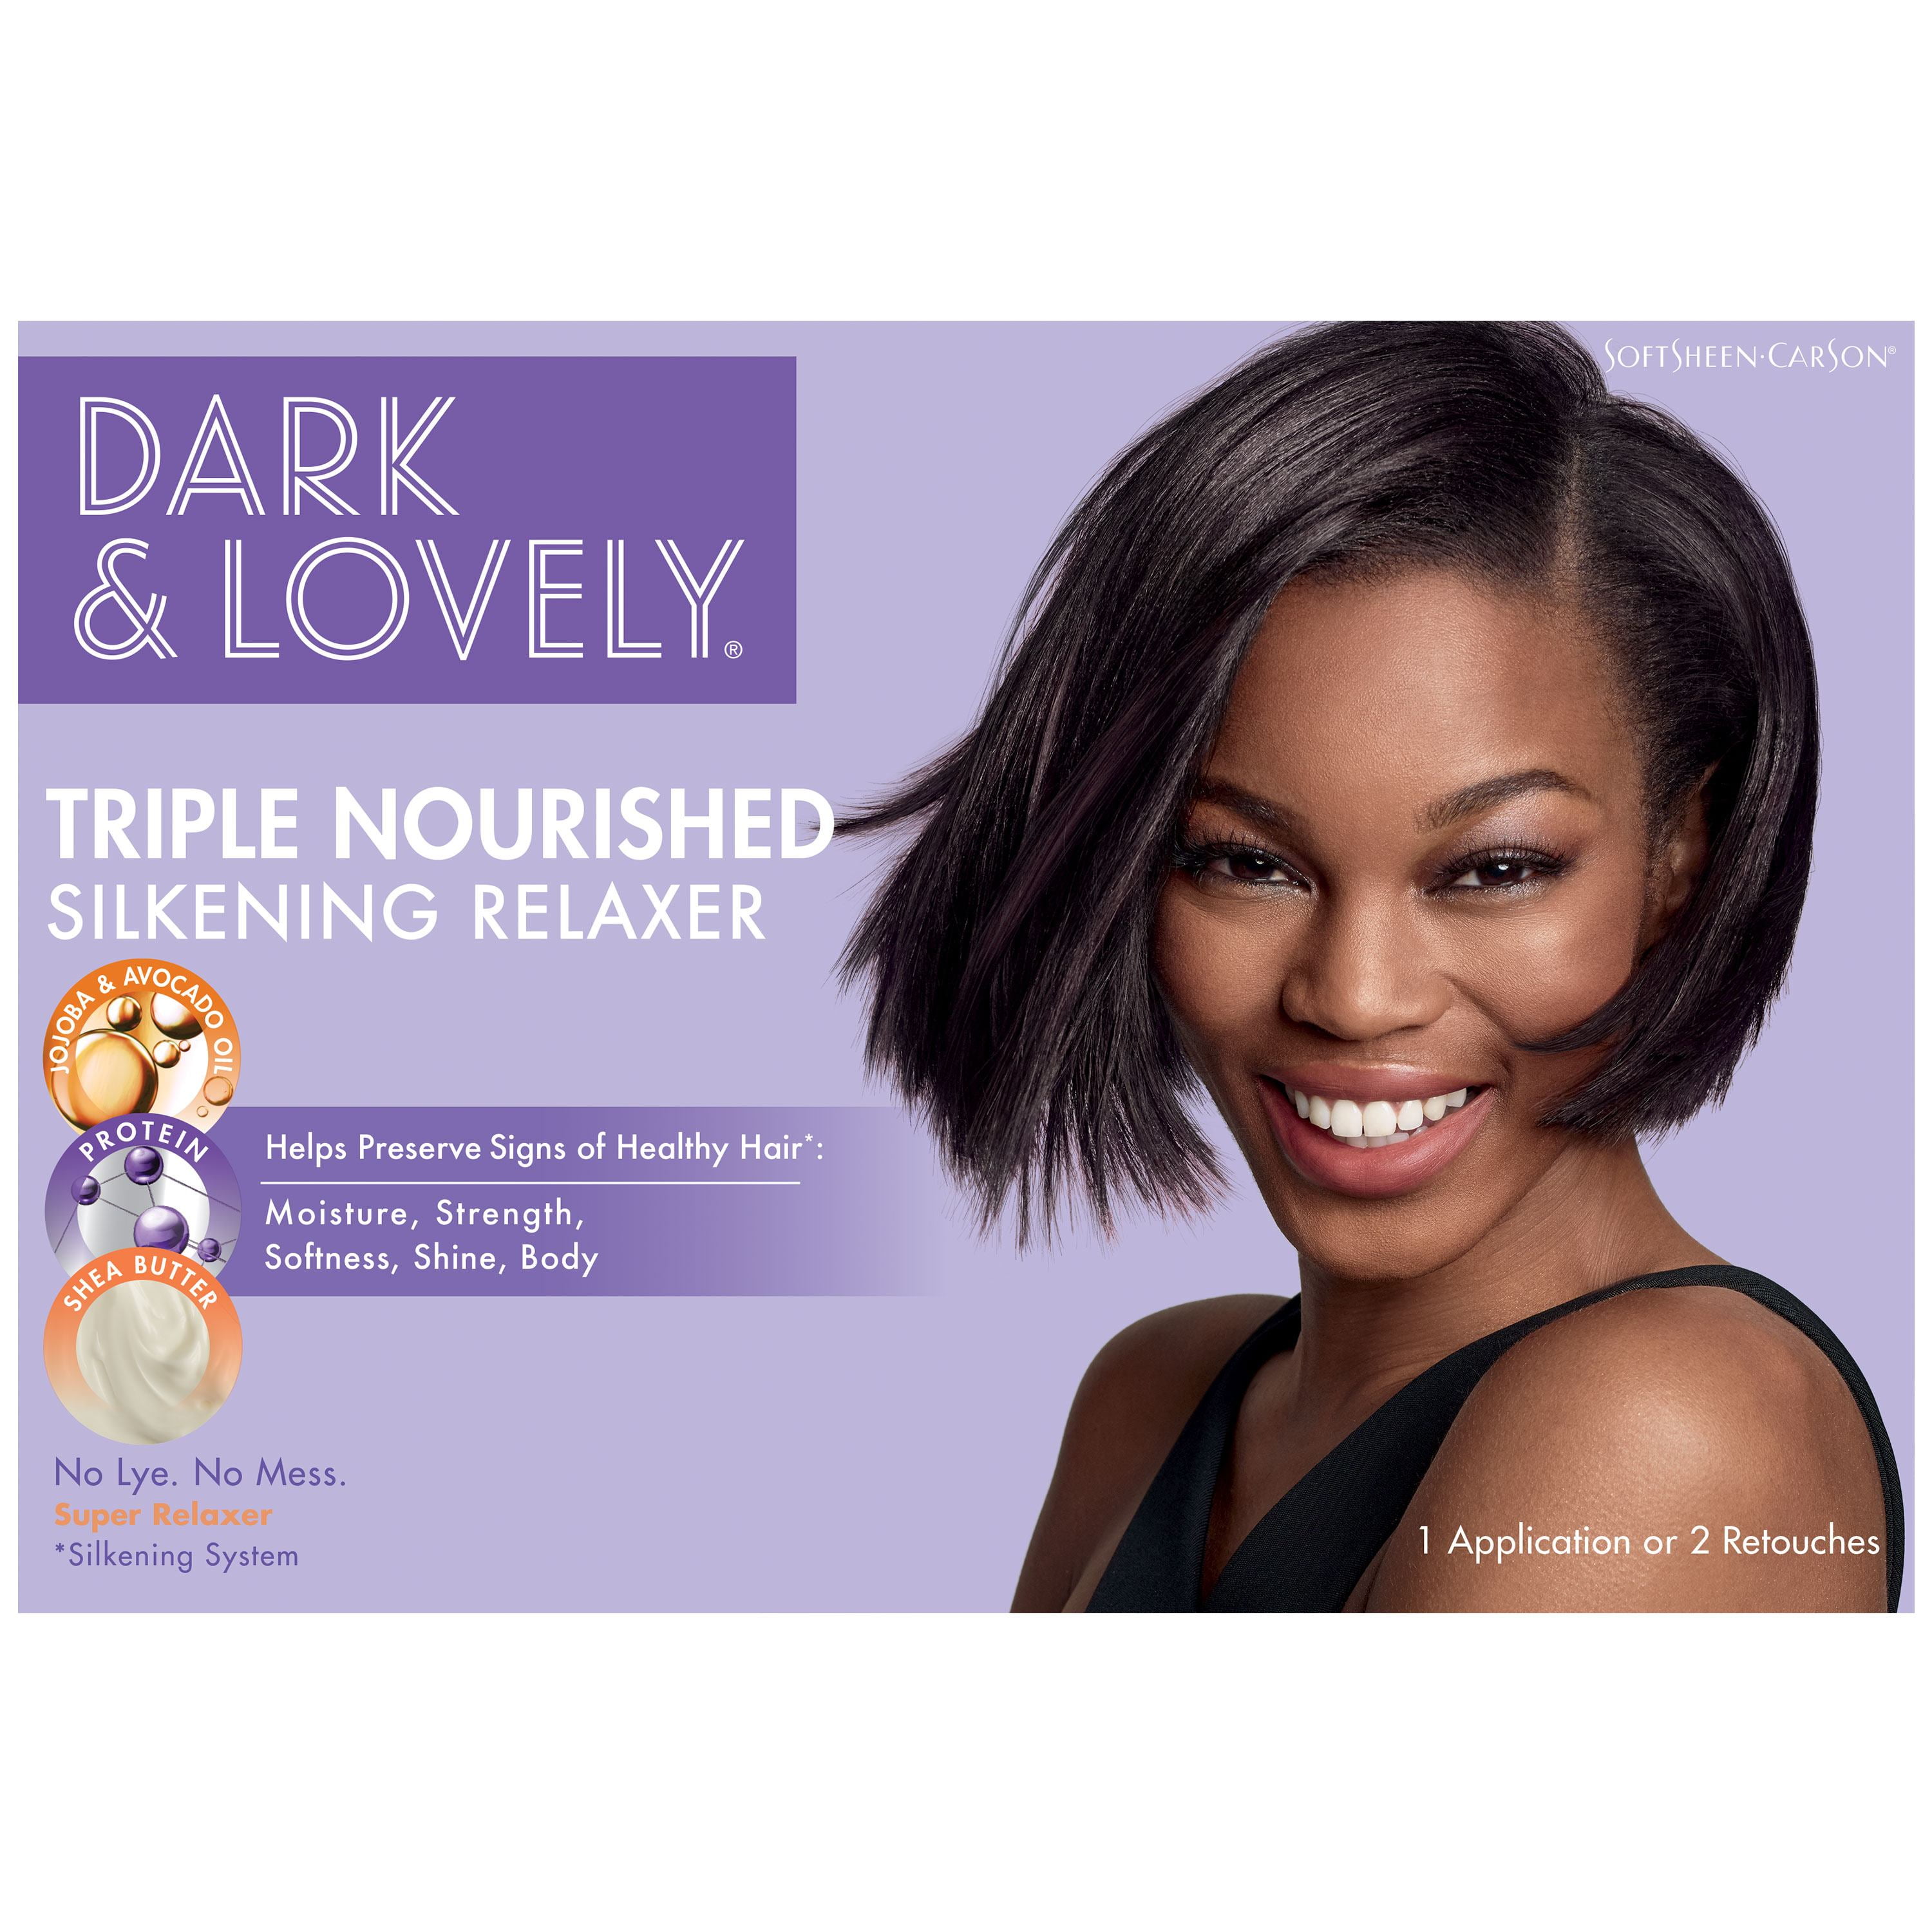 29 Top Images Lye Relaxers For Black Hair - 11 Best Relaxers For Black Hair 2020 For Afro 4a 4b And 4c Hair Types That Sister